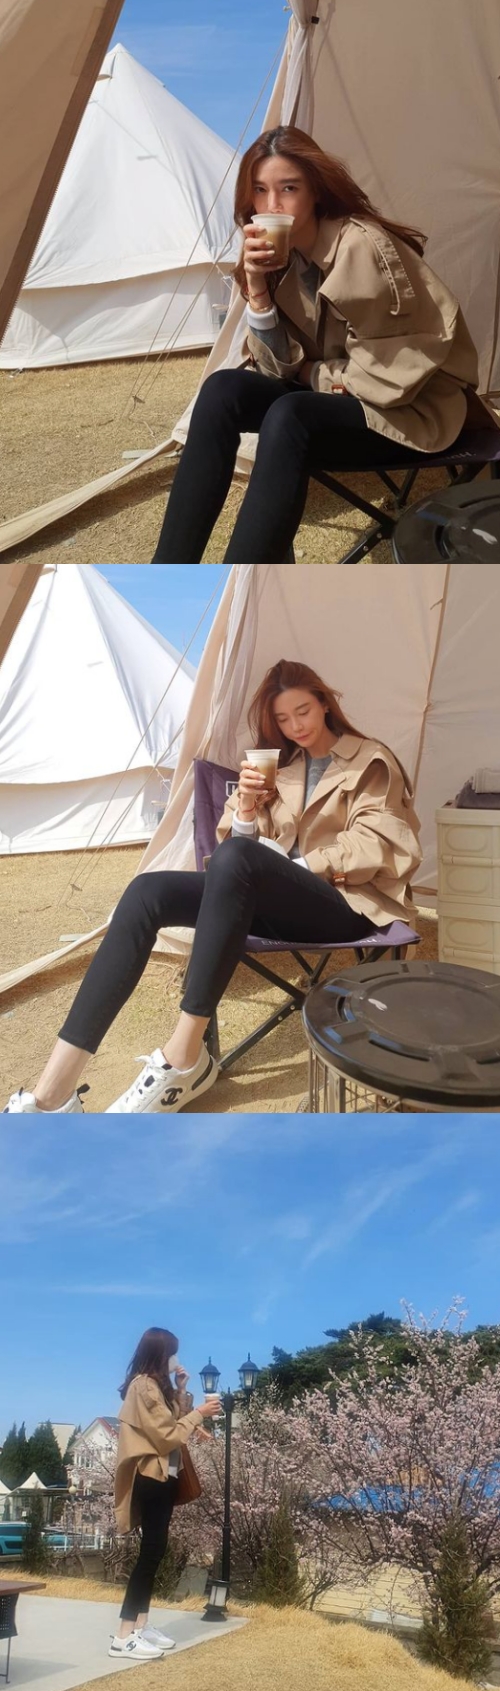 Actor Cha Ye-ryun has revealed his pictorial routine.Cha Ye-ryun posted a picture on his 24th day with an article entitled Why do you eat Coffee like Bear and Joju?Cha Ye-ryun in the public photo is having a relaxing time in the outdoors where flowers are beautiful.Cha Ye-ryun, who enjoys Coffee in a trench coat, emits charismatic eyes toward the camera and gives a picture-like aura.In addition, Cha Ye-ryun was surprised by his long legs and small face, stretching out without a sting, and he also had a sophisticated atmosphere with luxury sneakers.Meanwhile, Cha Ye-ryun met Actor Ju Sang Wook and MBC drama Gorgeous Temptation in 2016 and developed into a public lover, then marriaged the following year, and held her daughter Ina in 2018.Cha Ye-ryun SNS